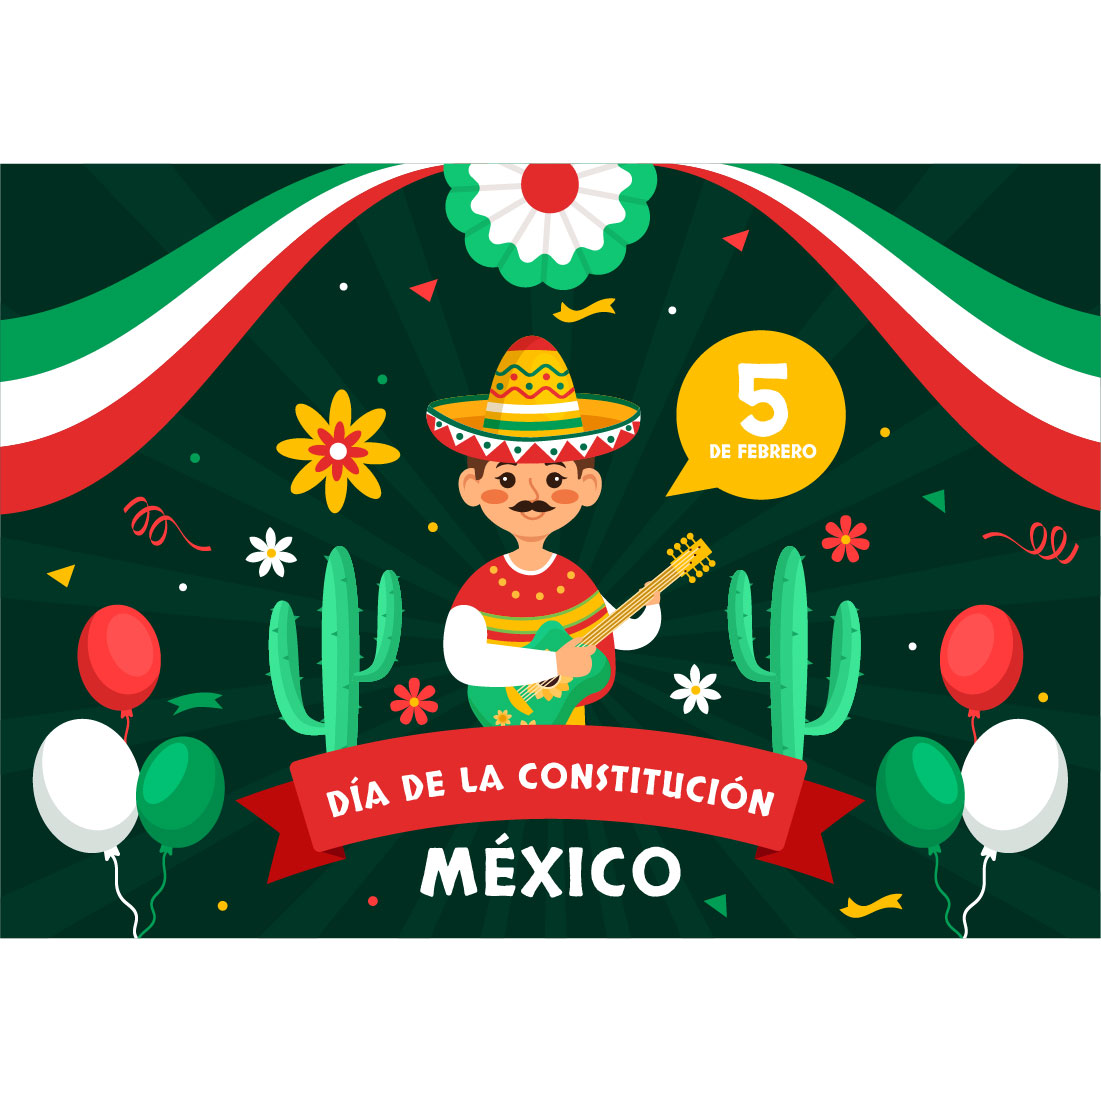 12 Constitution Day of Mexico Illustration cover image.